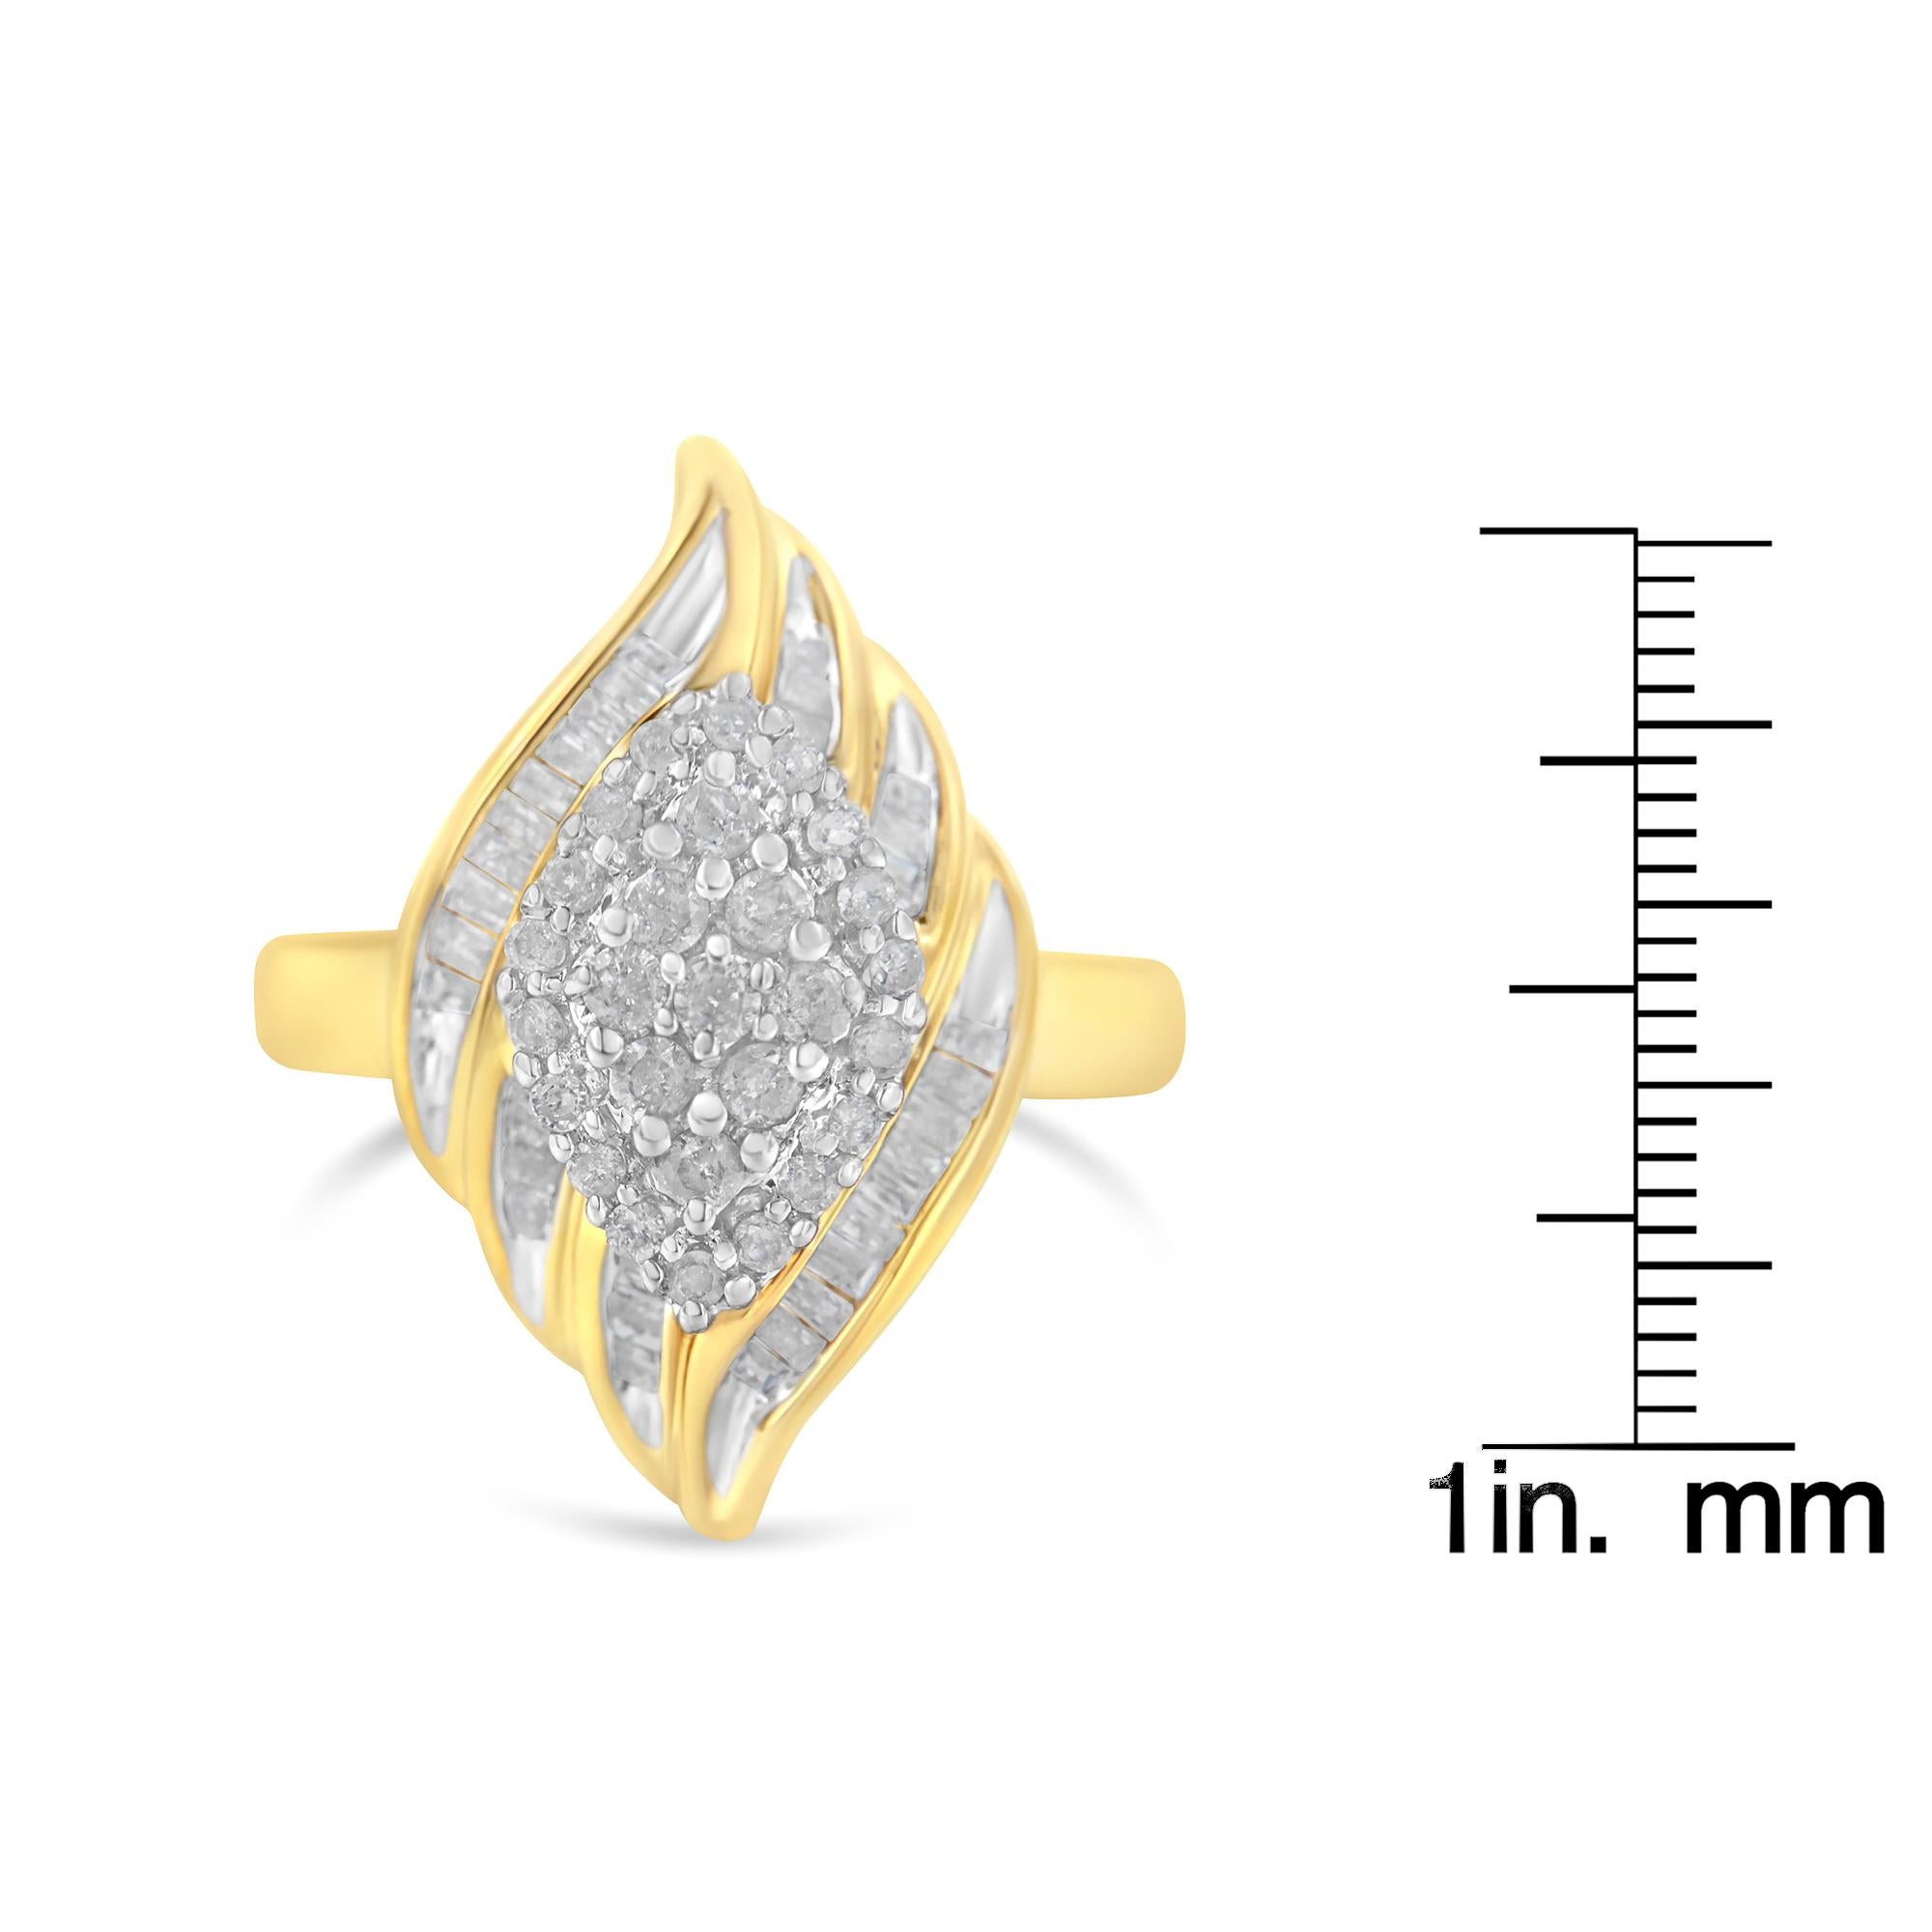 Women's 10K Yellow Gold 3/4 Cttw Diamond Cocktail Ring (I-J Color, I2-I3 Clarity) For Sale